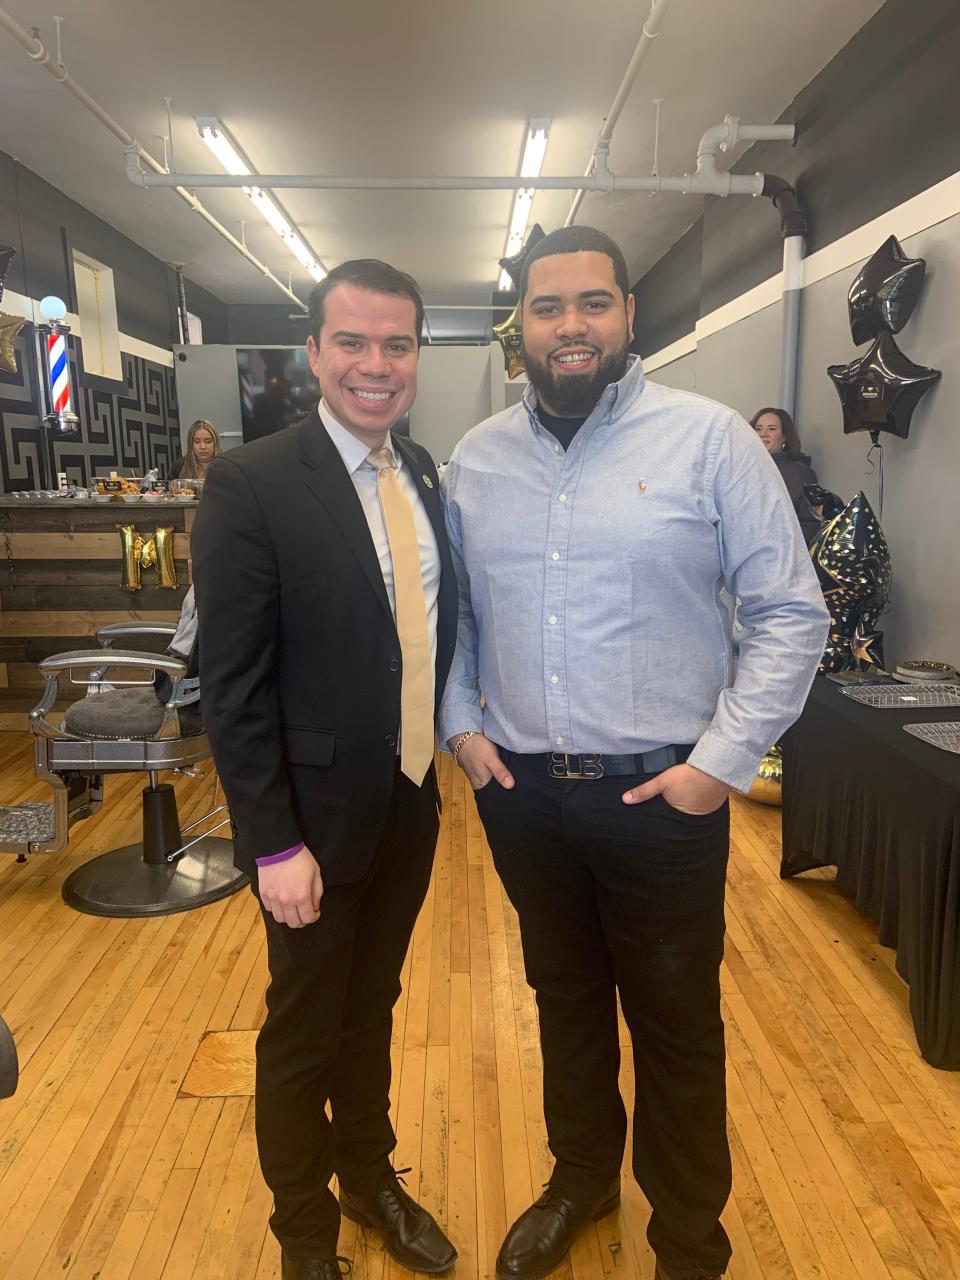 Mayor Michael Nicholson, left, and owner Vincent Santana at the grand opening ceremony for the MVP Barber Studio II in Gardner on Monday, Feb. 5.